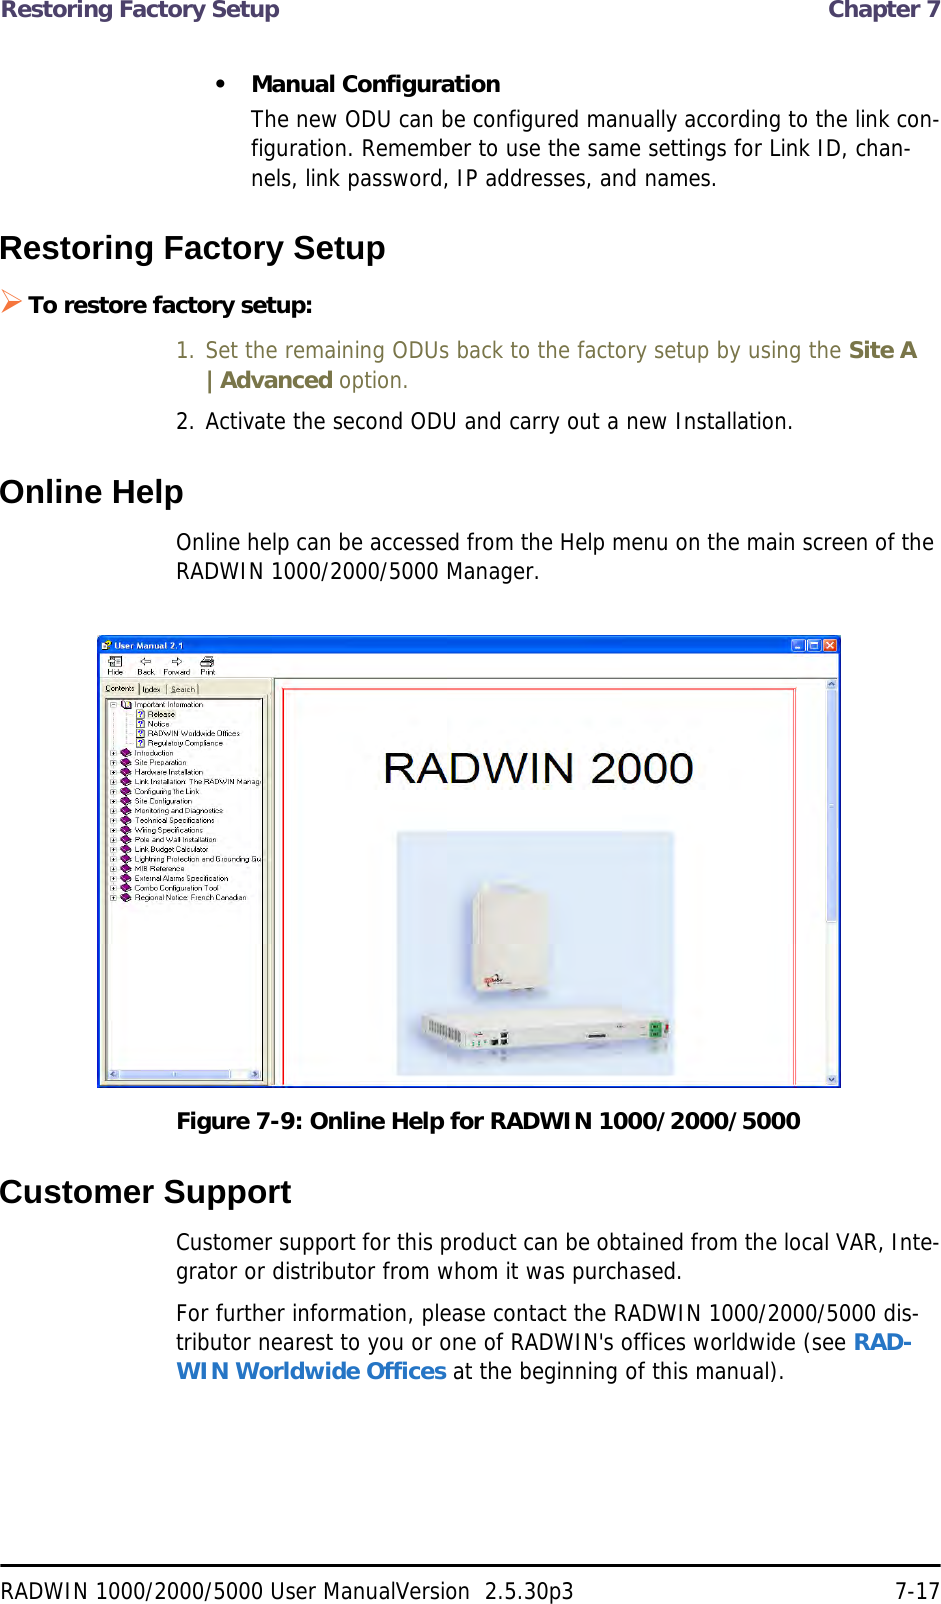 Restoring Factory Setup  Chapter 7RADWIN 1000/2000/5000 User ManualVersion  2.5.30p3 7-17• Manual ConfigurationThe new ODU can be configured manually according to the link con-figuration. Remember to use the same settings for Link ID, chan-nels, link password, IP addresses, and names. Restoring Factory SetupTo restore factory setup:1. Set the remaining ODUs back to the factory setup by using the Site A |Advanced option.2. Activate the second ODU and carry out a new Installation.Online HelpOnline help can be accessed from the Help menu on the main screen of the RADWIN 1000/2000/5000 Manager.Figure 7-9: Online Help for RADWIN 1000/2000/5000Customer SupportCustomer support for this product can be obtained from the local VAR, Inte-grator or distributor from whom it was purchased.For further information, please contact the RADWIN 1000/2000/5000 dis-tributor nearest to you or one of RADWIN&apos;s offices worldwide (see RAD-WIN Worldwide Offices at the beginning of this manual).